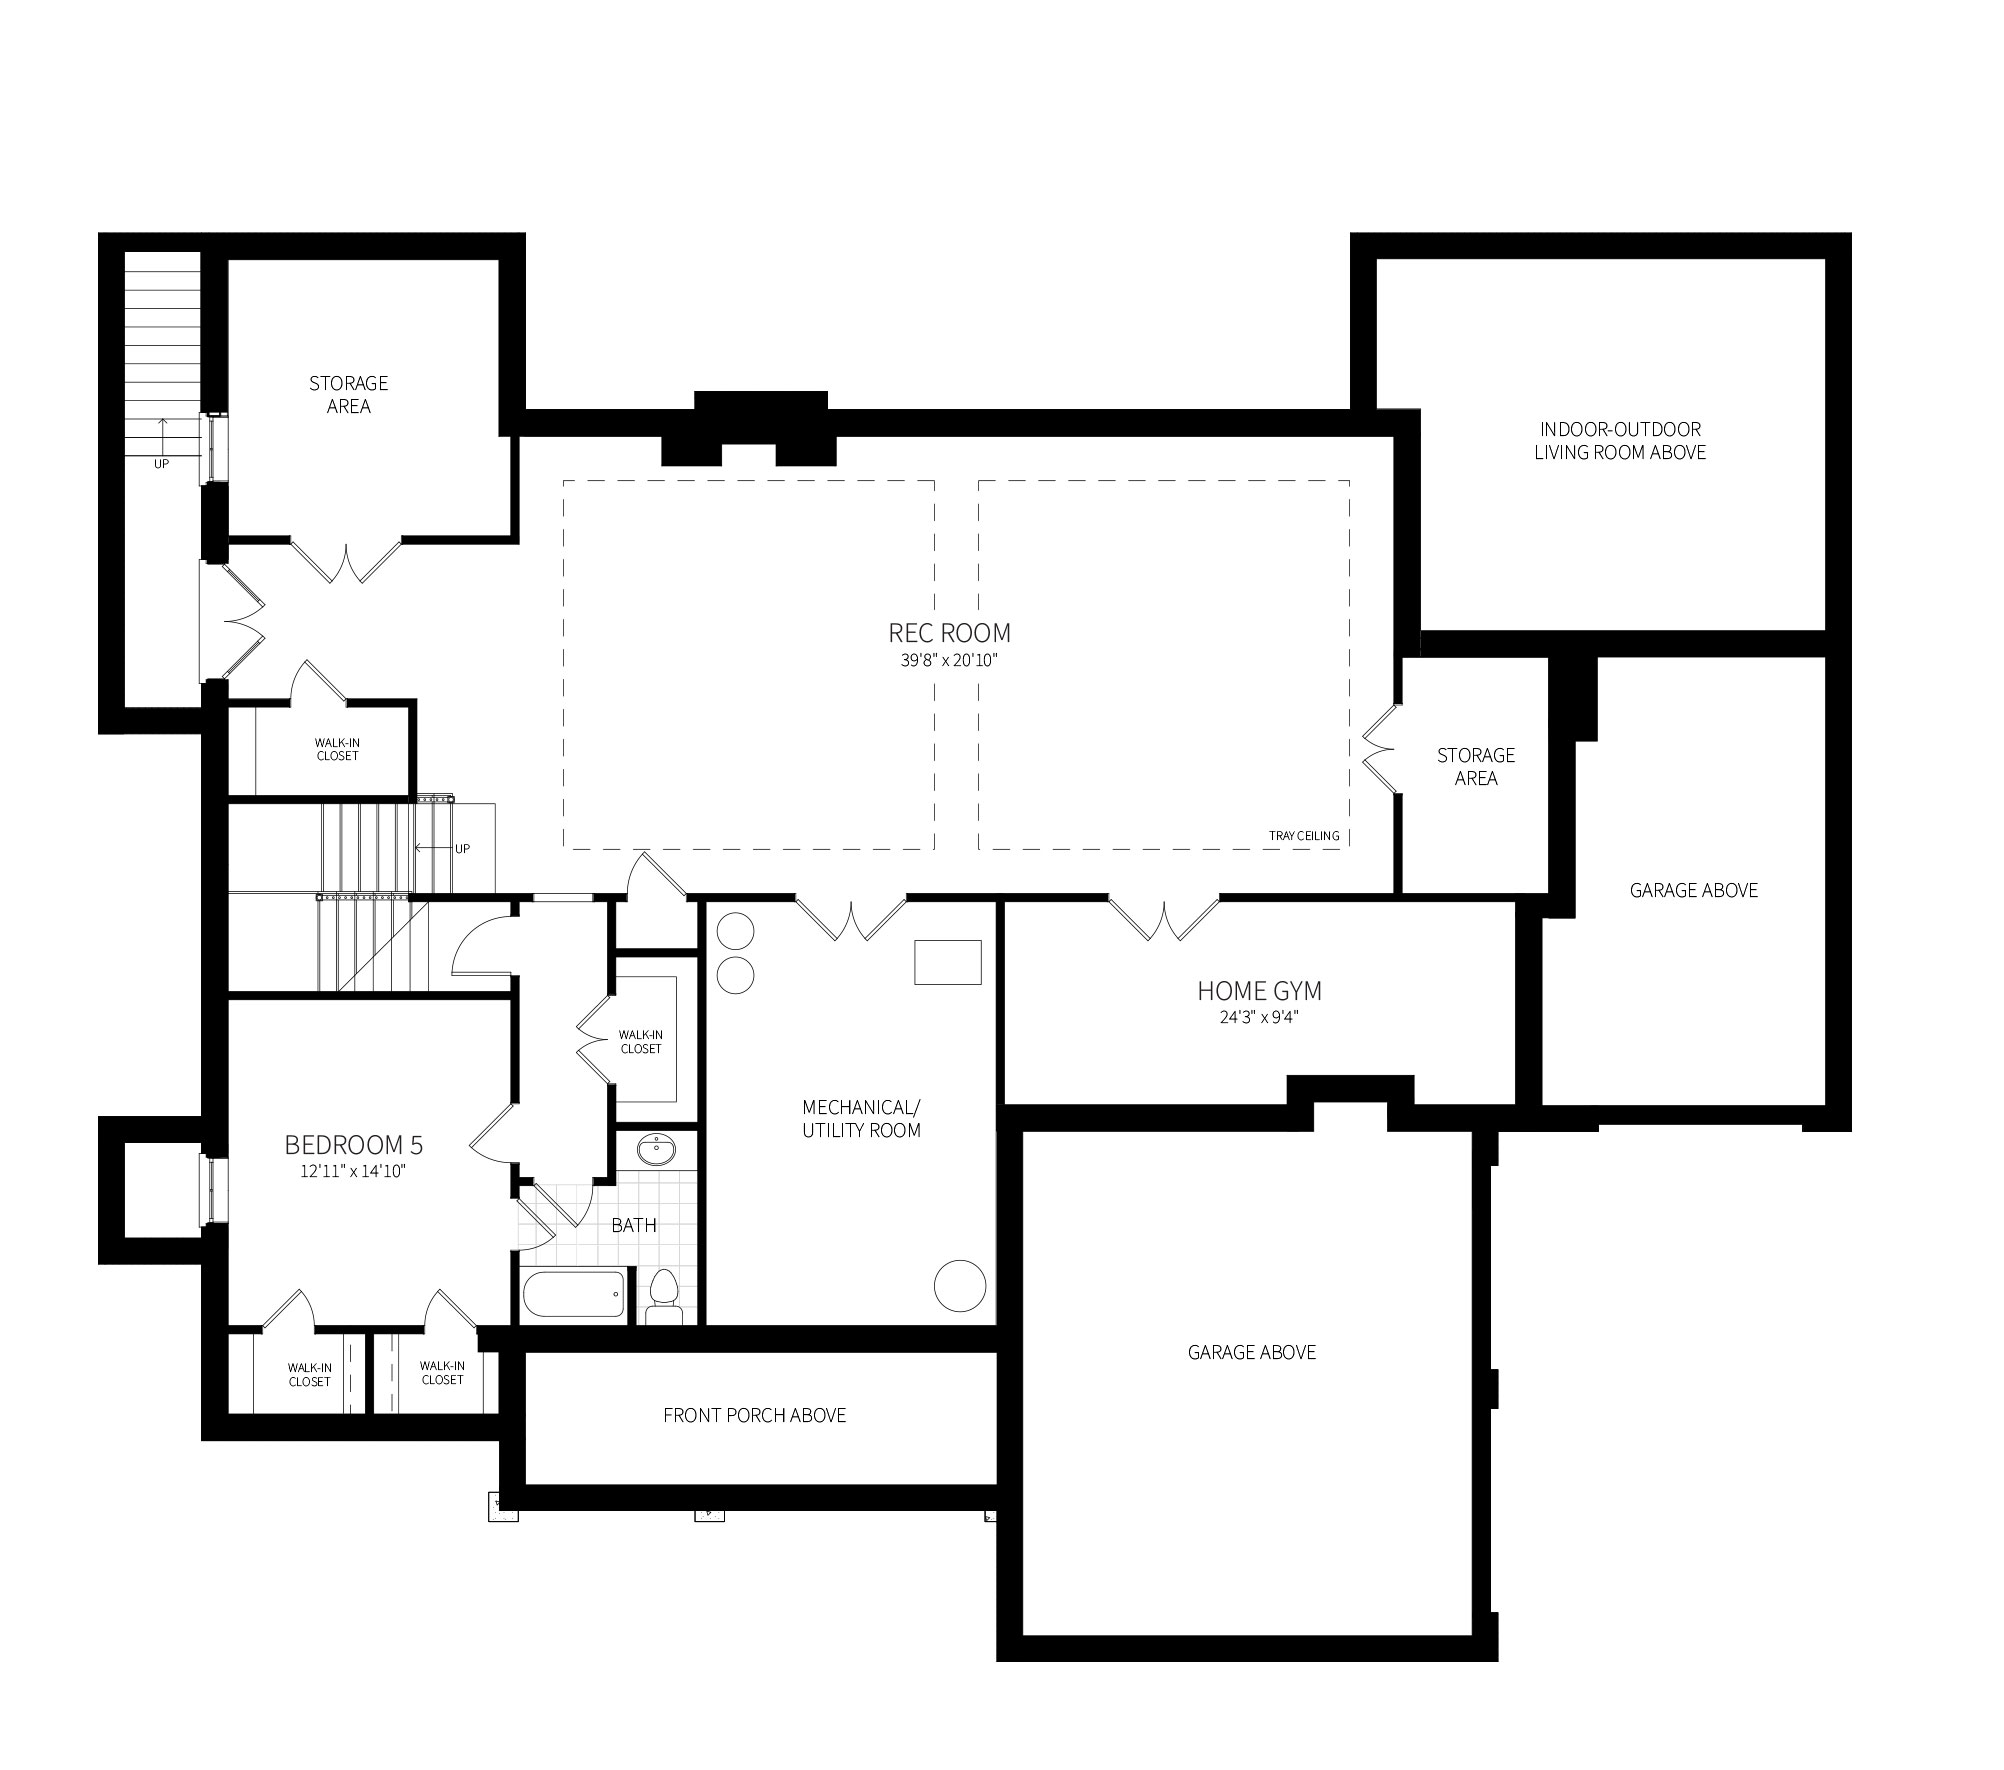 The basement plan of a highly custom modern farmhouse with 40 foot wide Rec Room, home gym and additional bedroom.